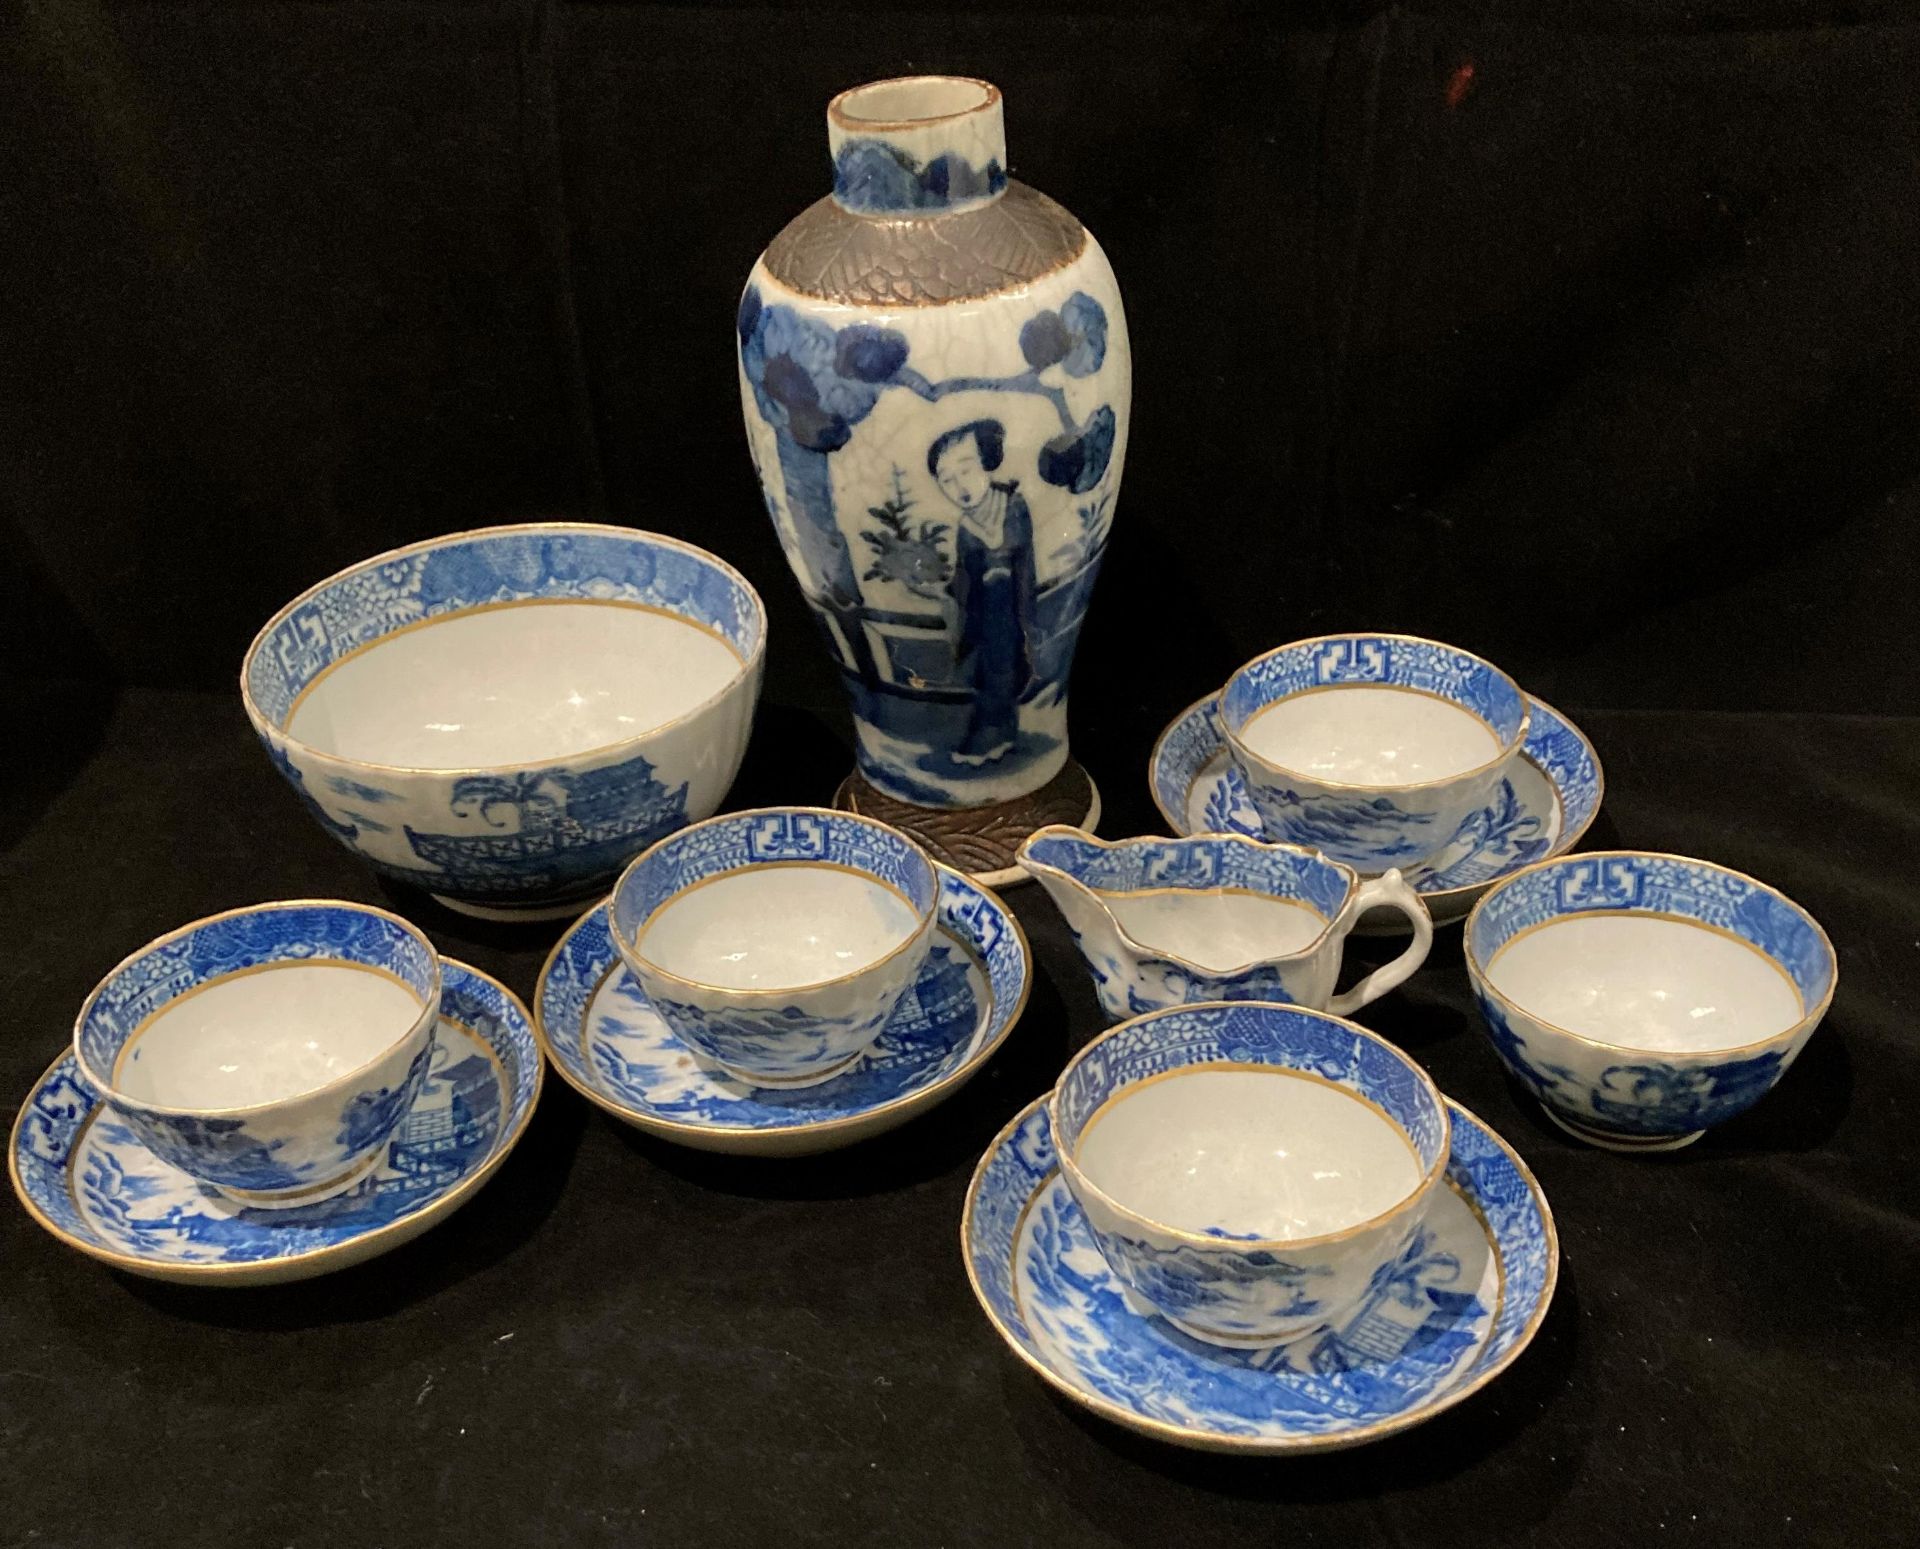 A Nineteenth century Chinese blue and white crackleware vase 23.